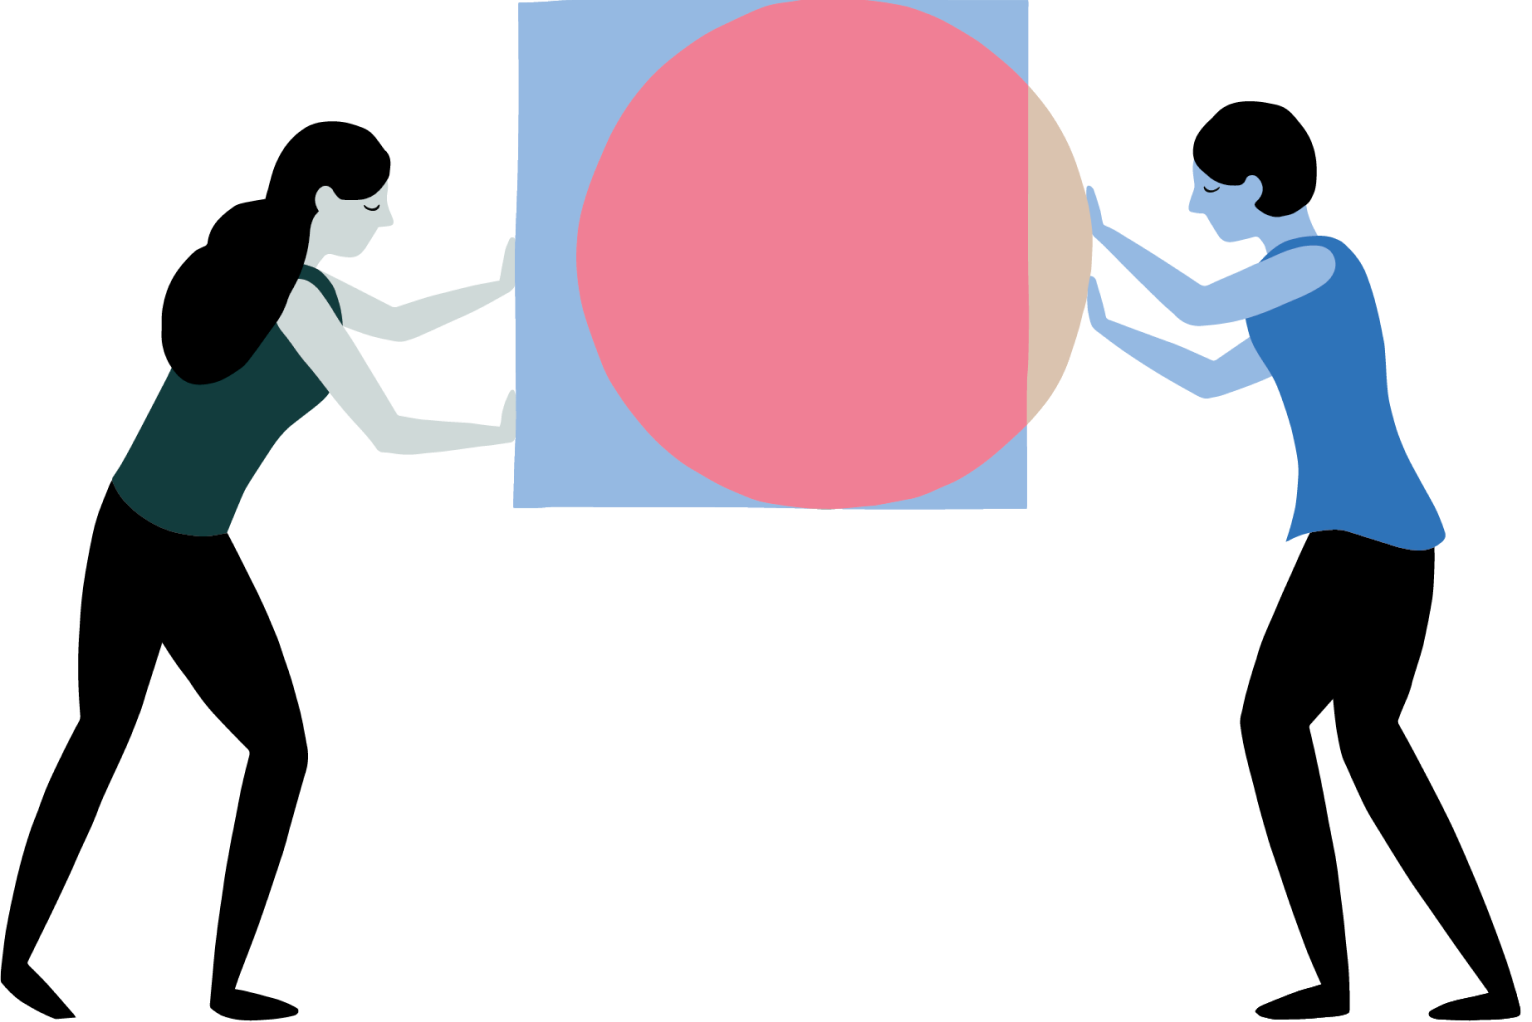 A woman pushes a square toward another woman, who pushes a circle. The two shapes overlap.